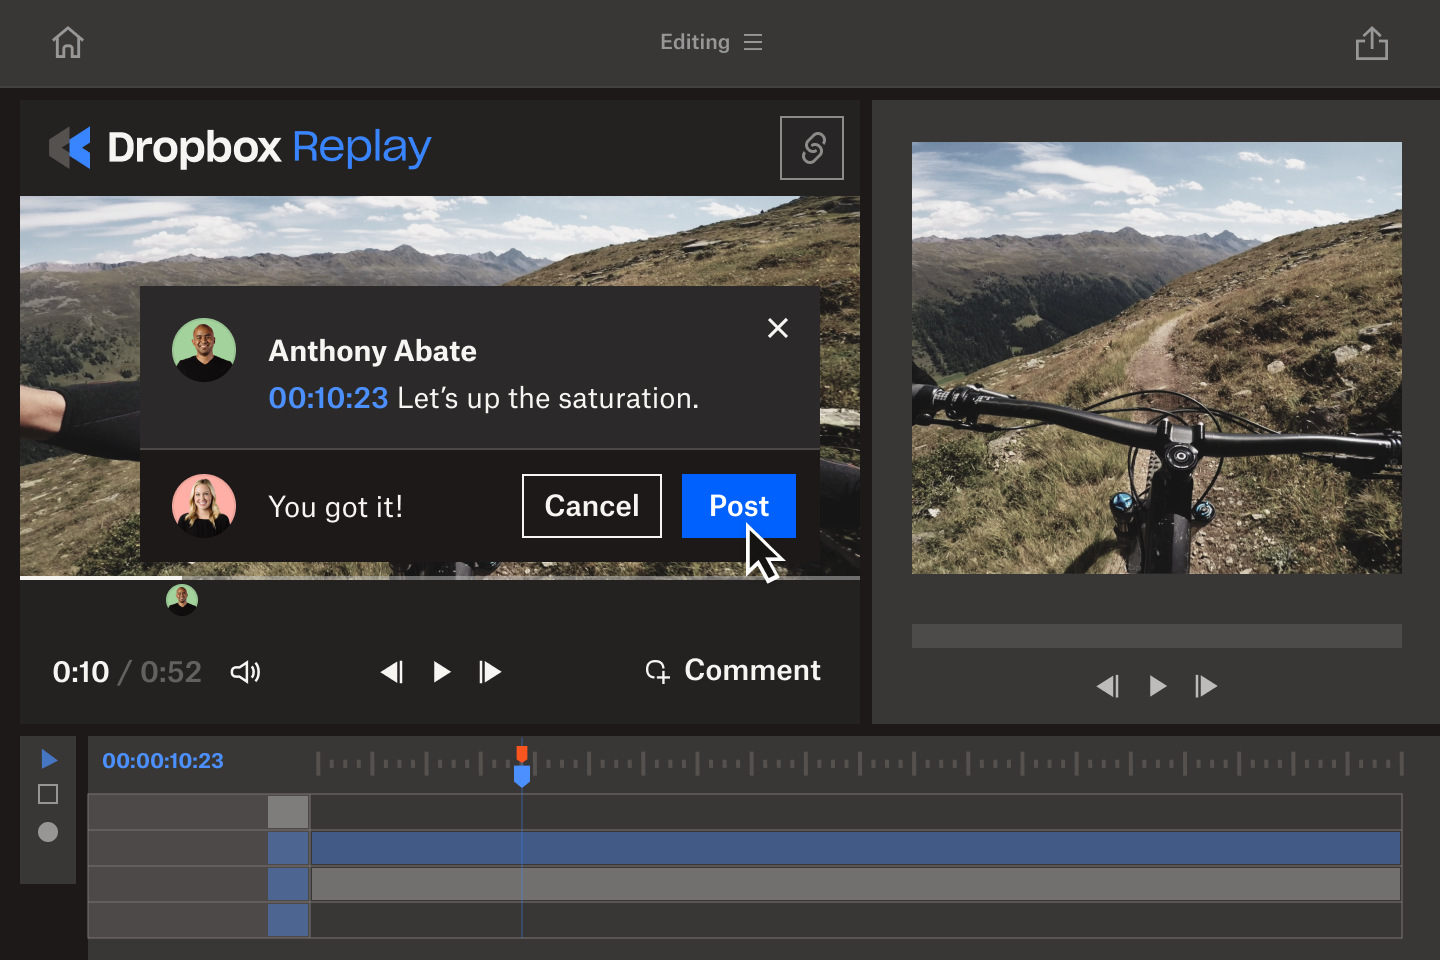 Frame-specific annotations in Dropbox Replay make video collaboration easy